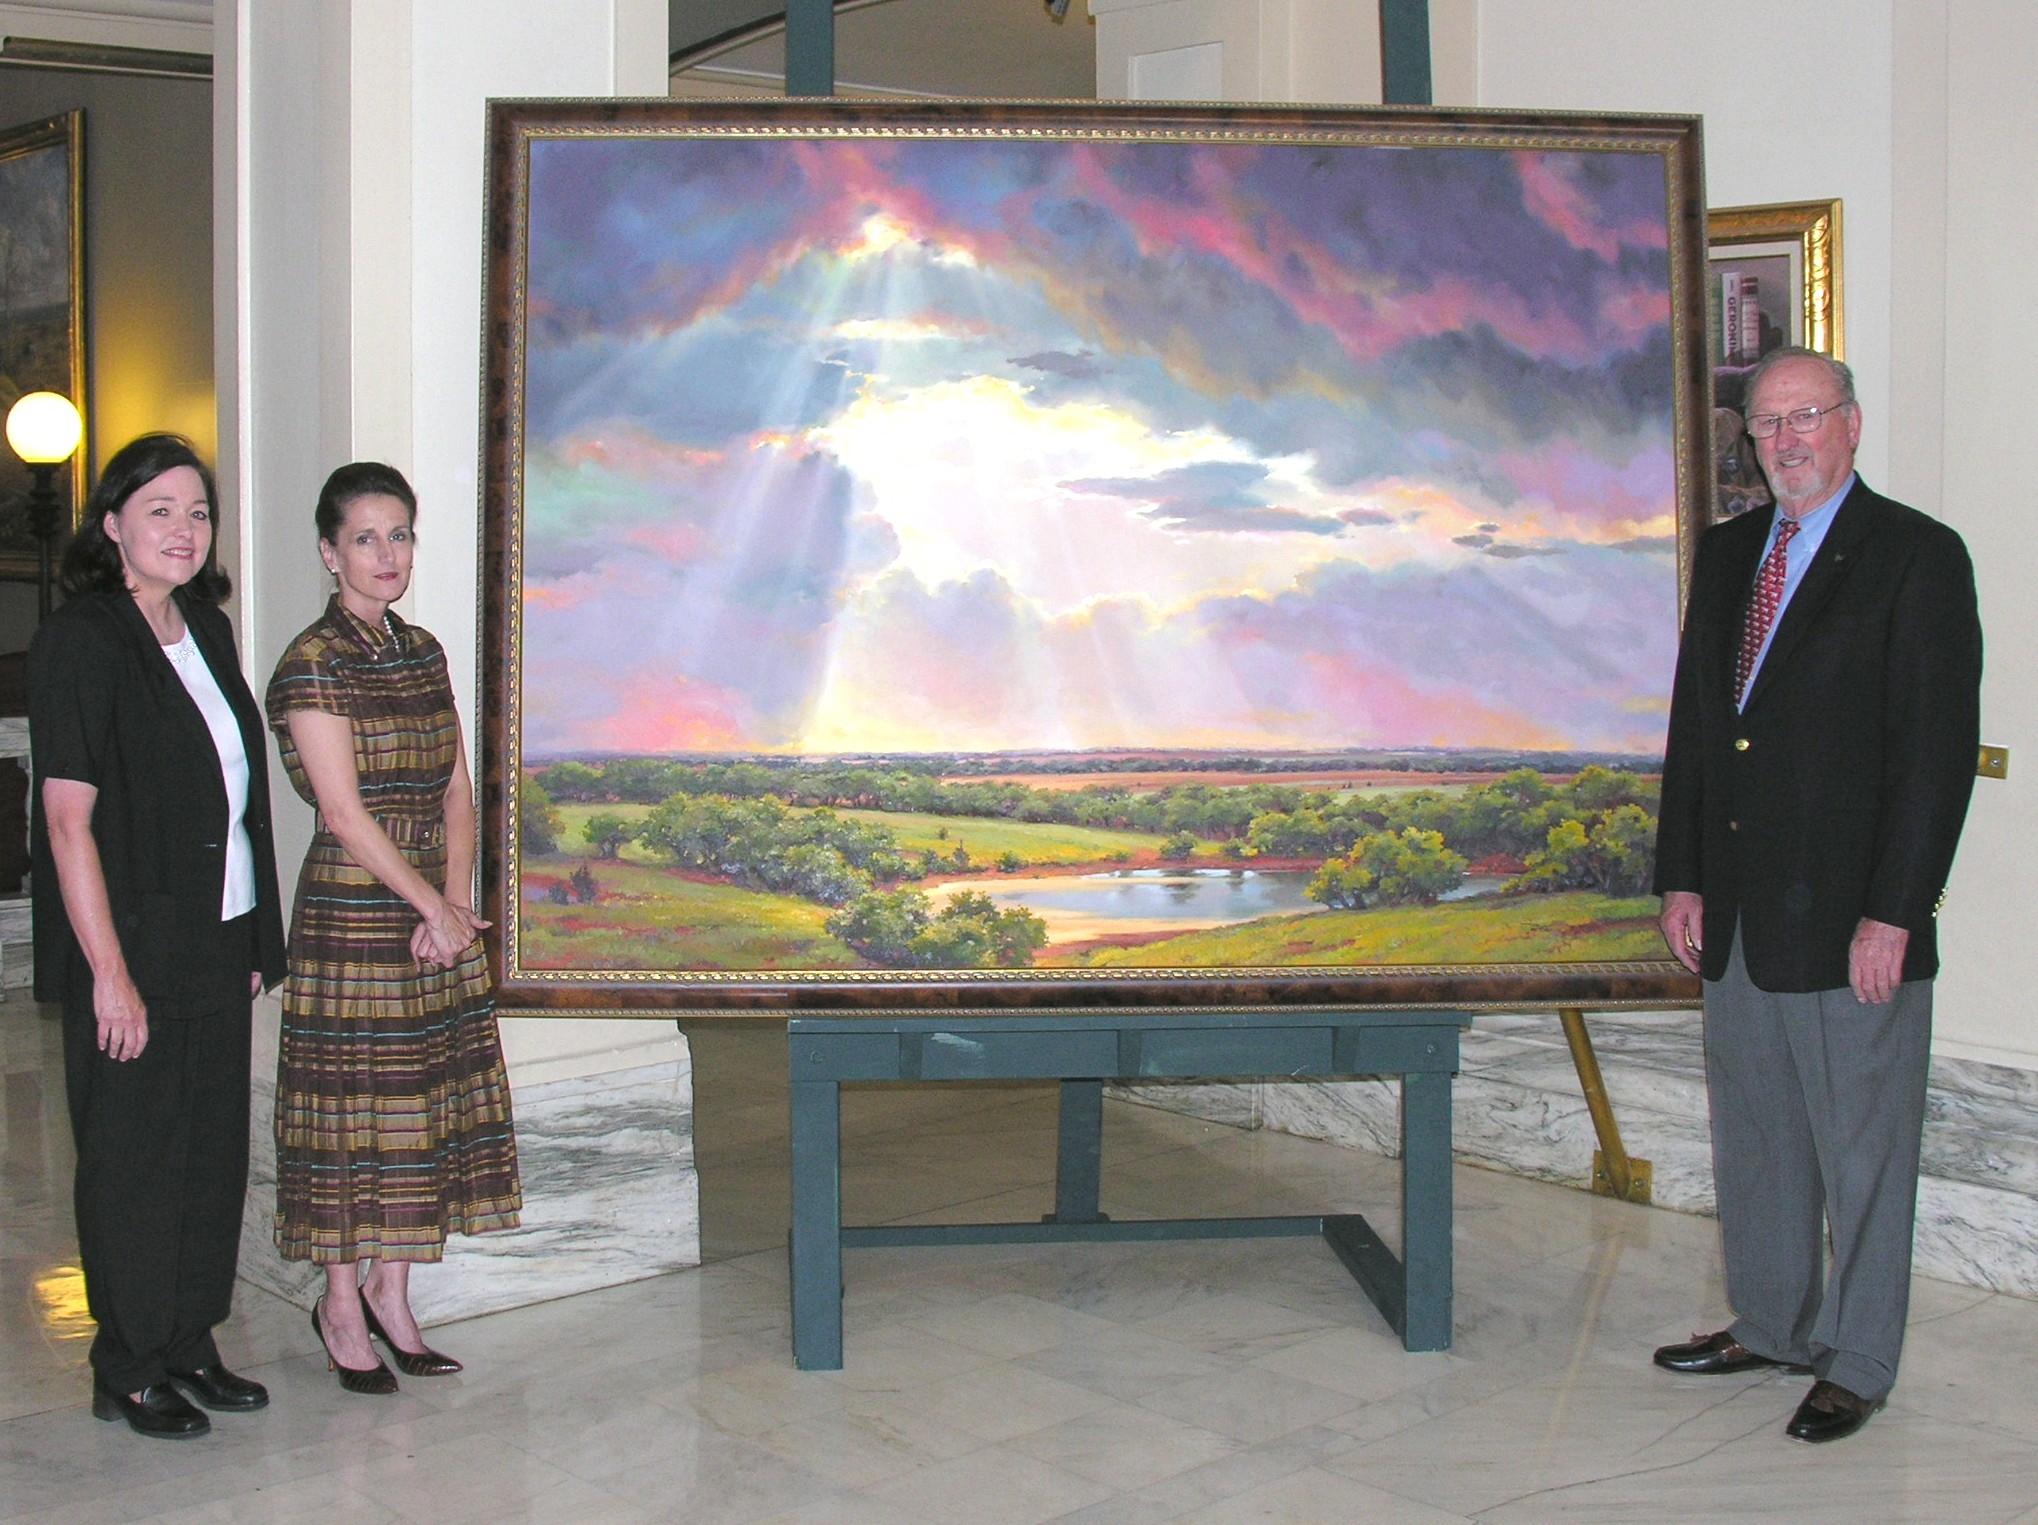 Artist Linda Tuma Robertson, Barbara McCune and Charles Ford pose with the painting following the unveiling in the House Chamber.